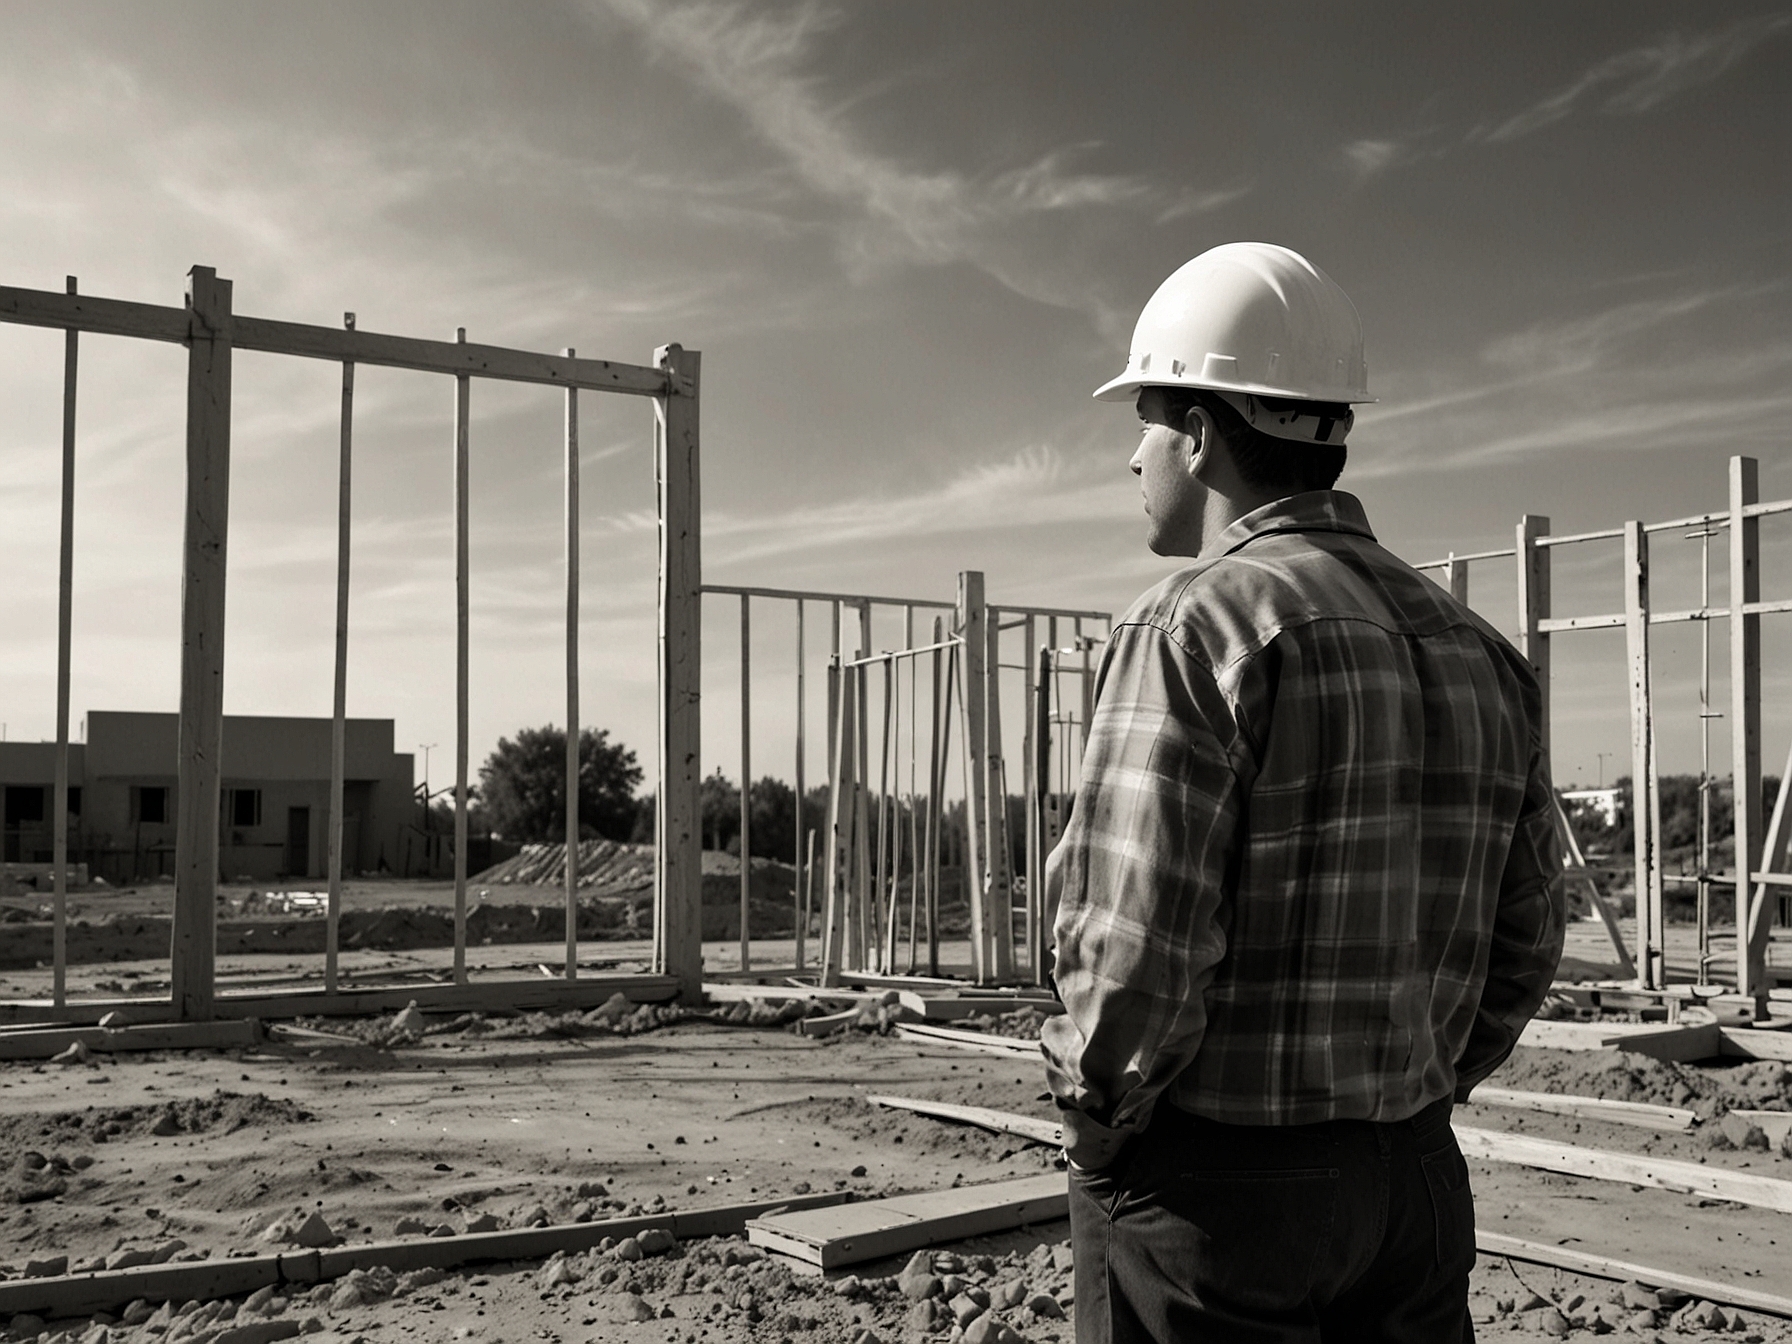 A homebuilder facing an empty work site, symbolizing the critical labor shortages plaguing the construction sector due to stringent immigration policies.